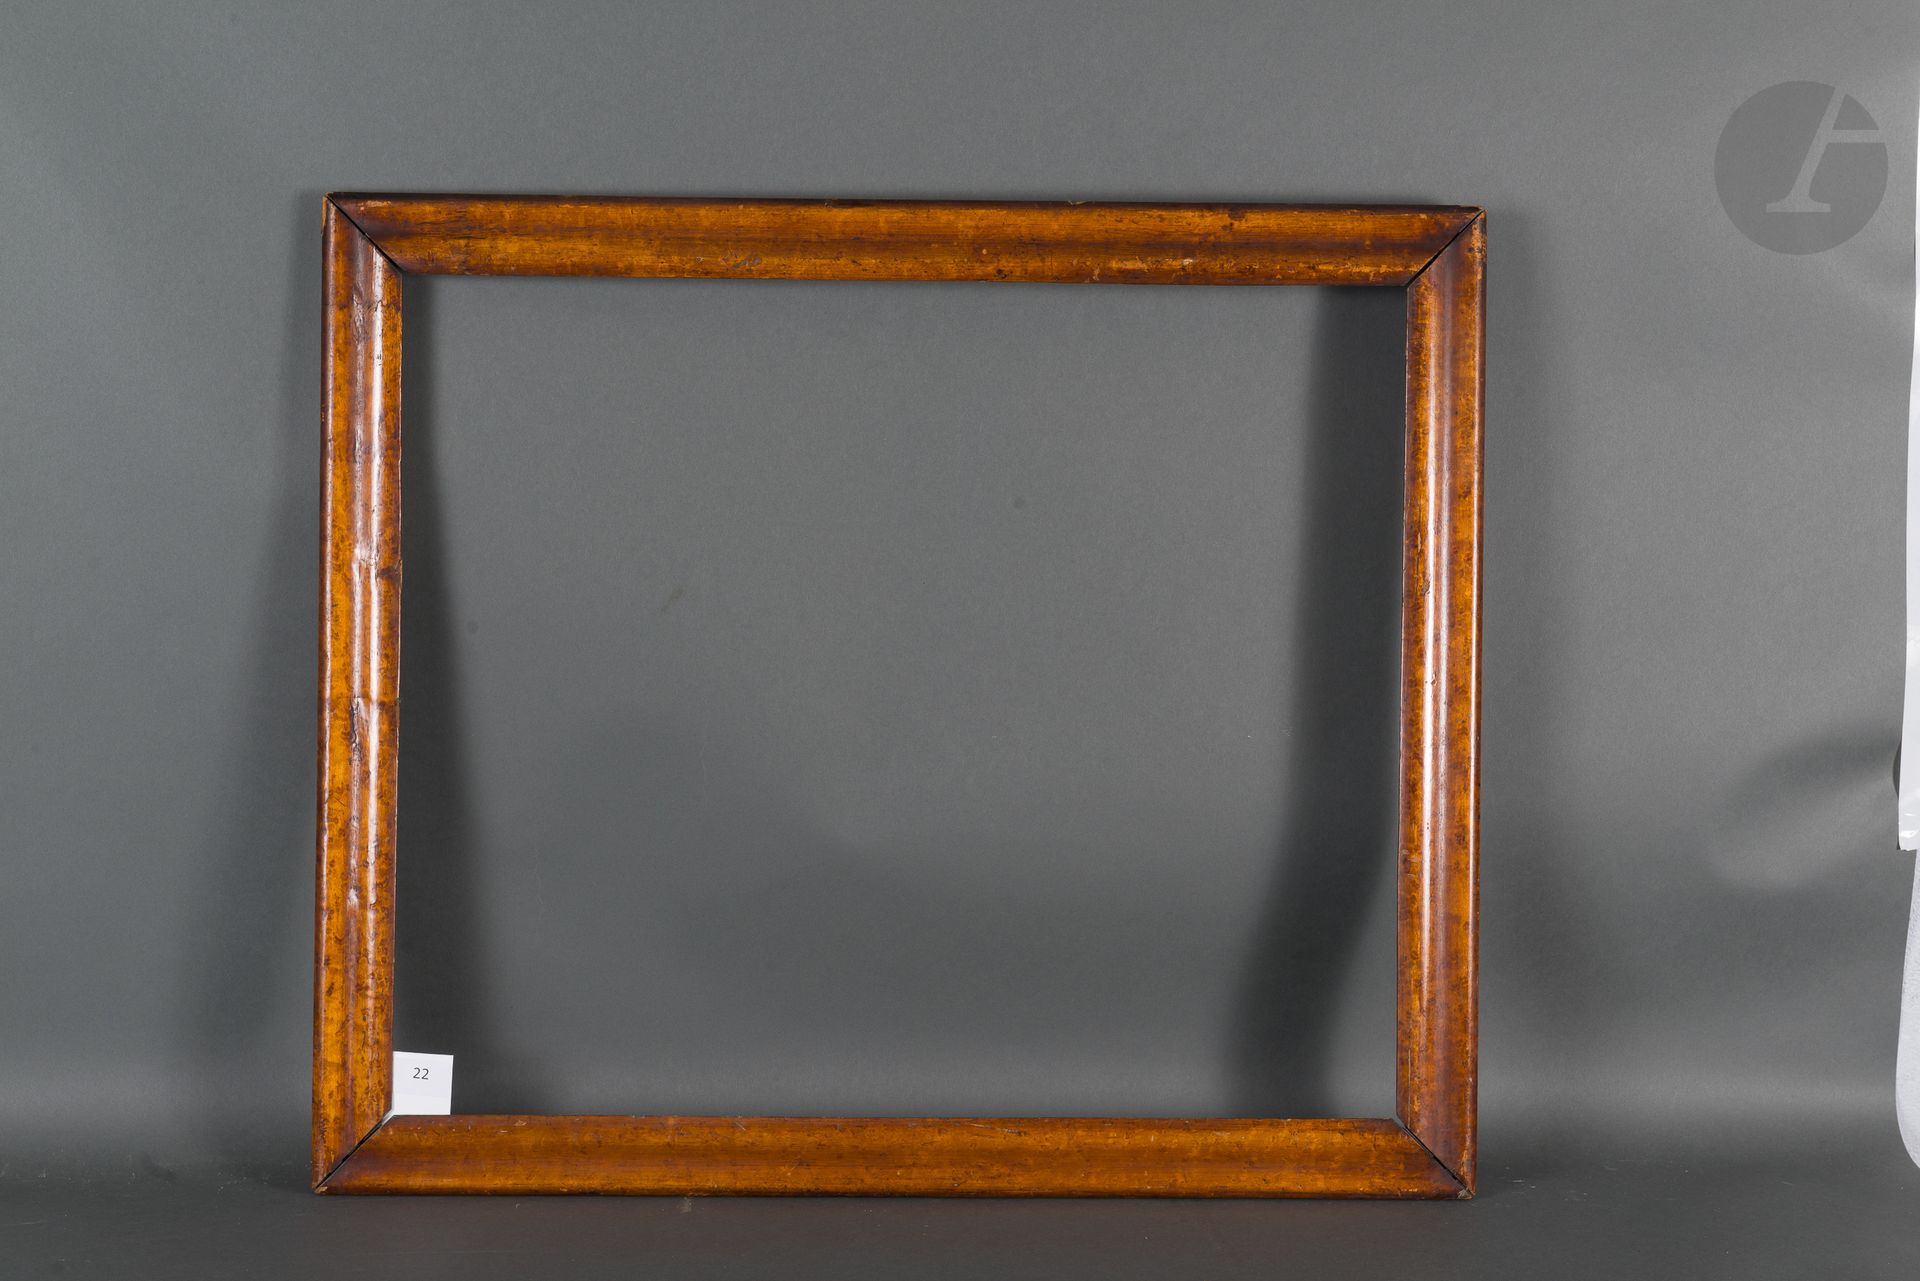 Null Frame with reversed profile in molded wood veneered with burr.
Louis-Philip&hellip;